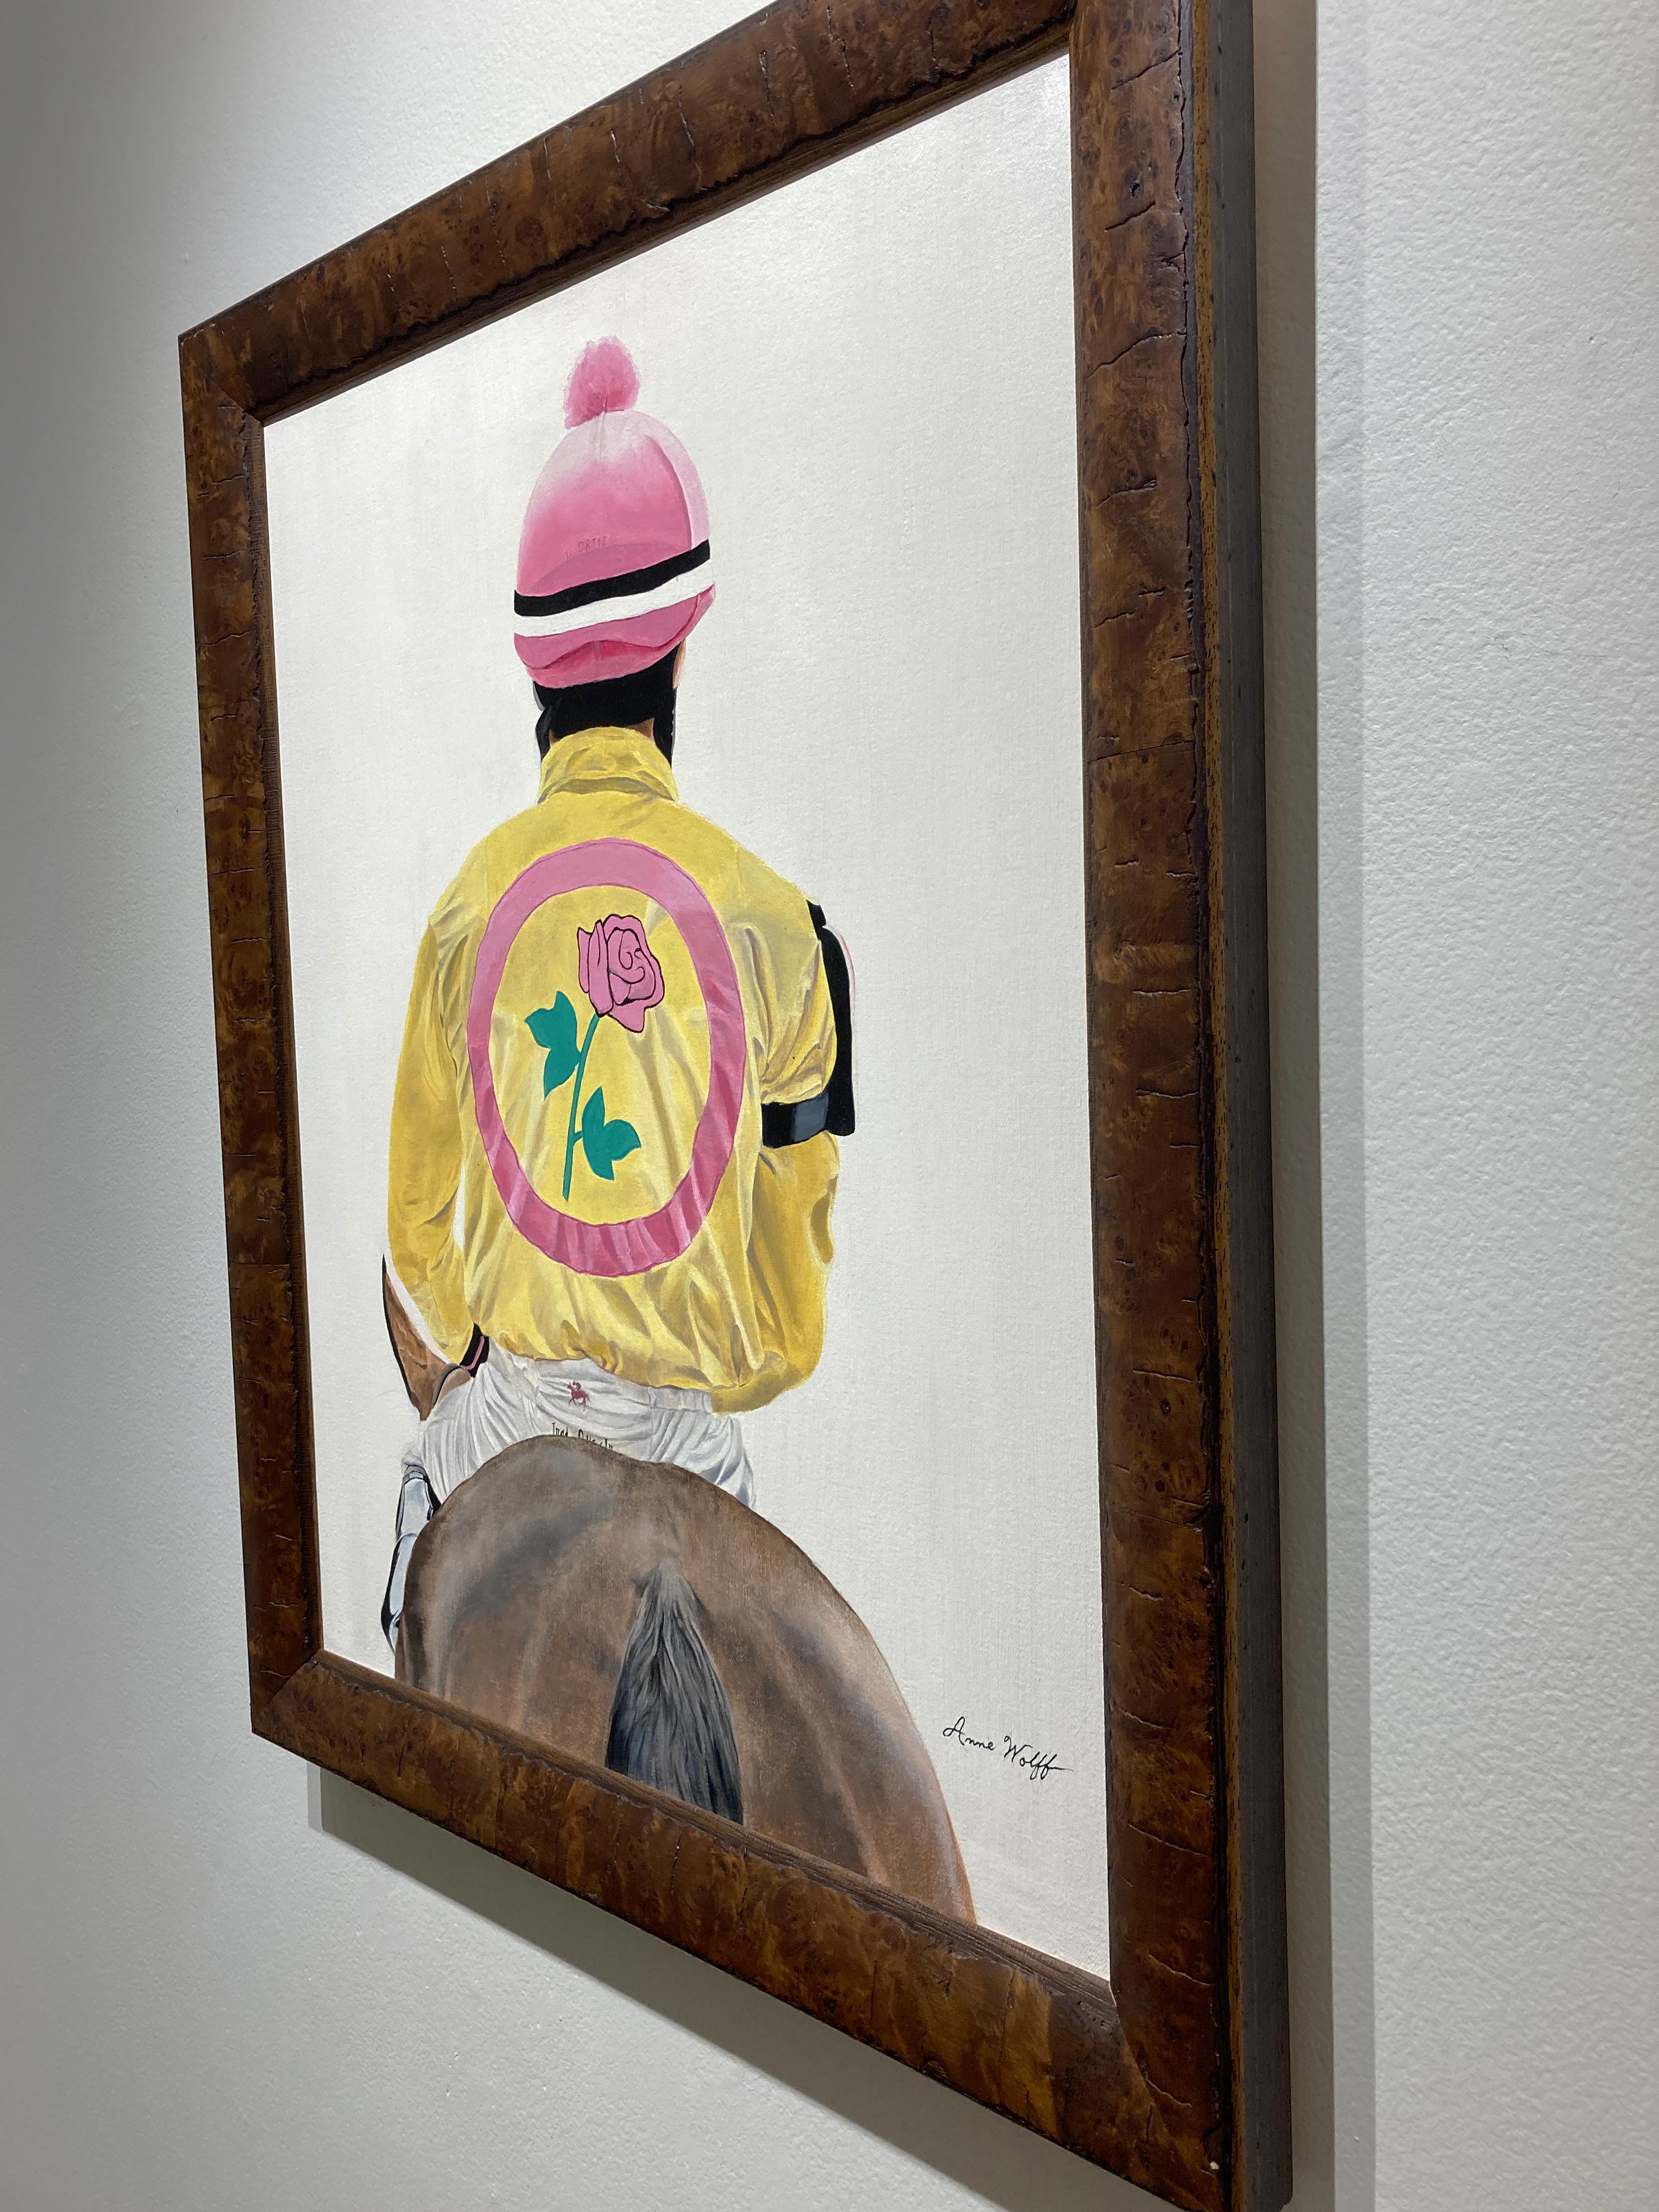 This equine racing painting 